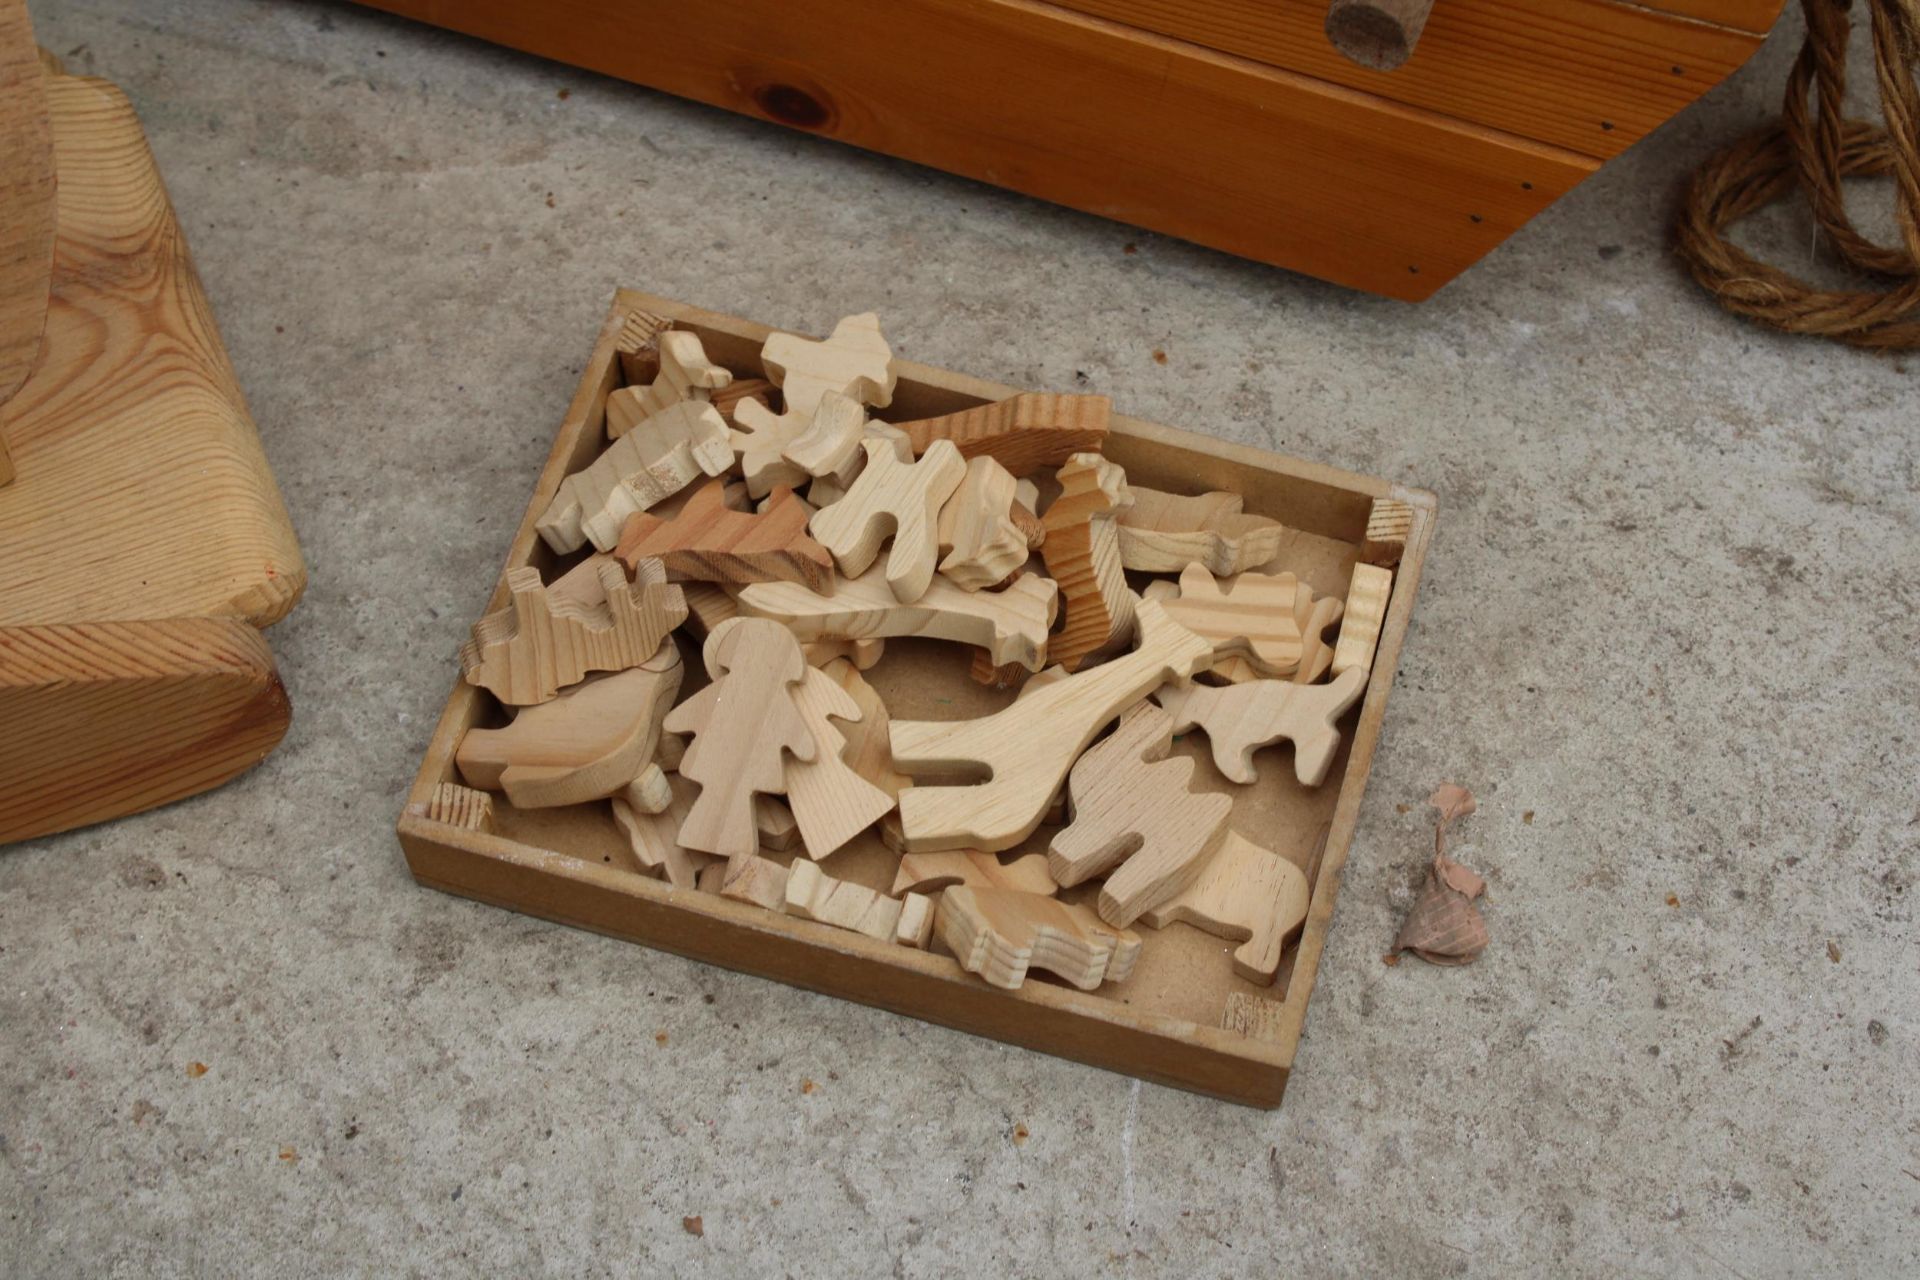 TWO WOODEN ARKS AND WOODEN ANIMALS - Image 2 of 3